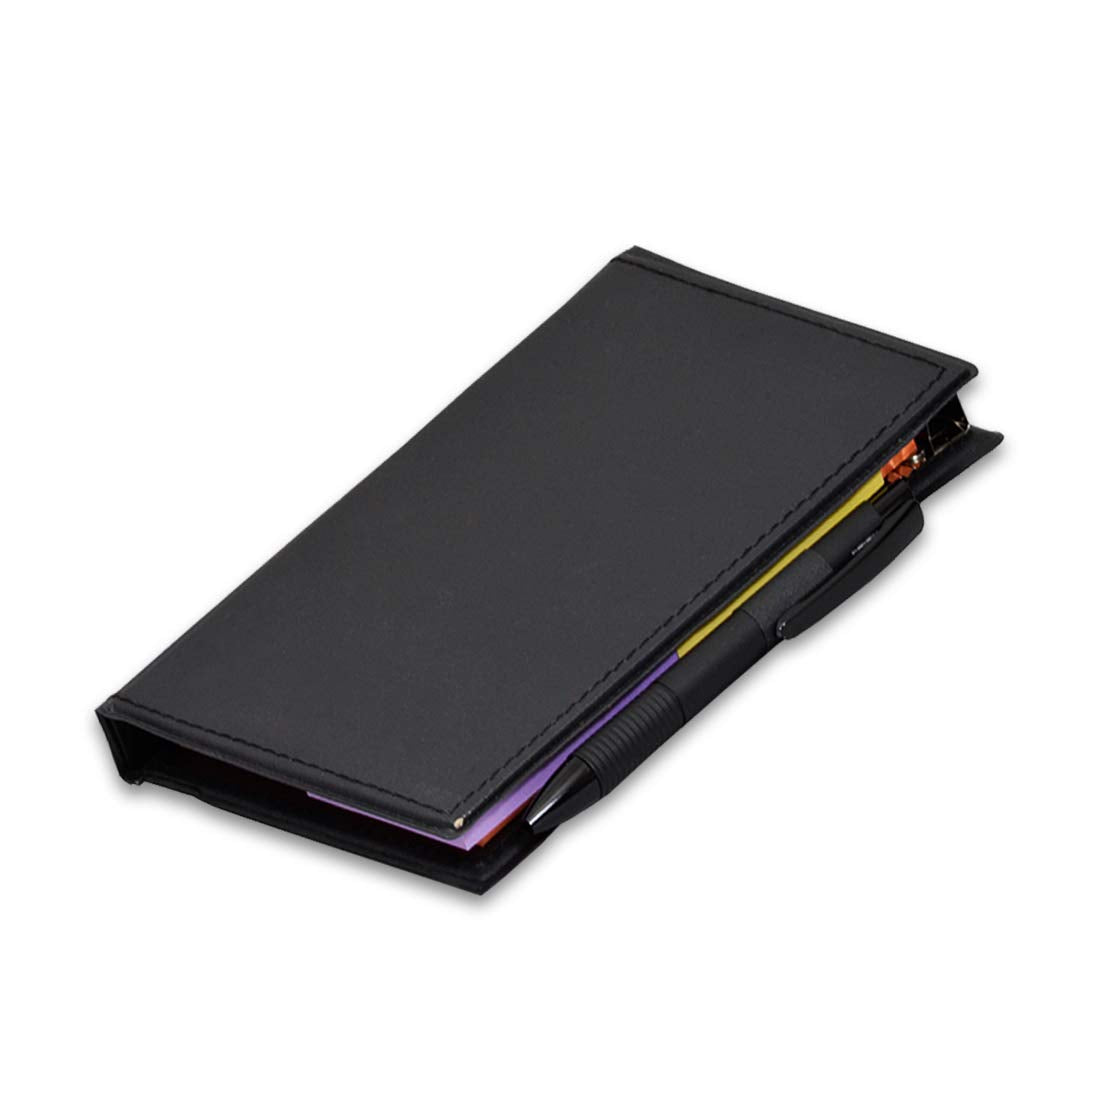 199 Store: Paperlla, Diary Organiser 2023, Sticky Notes